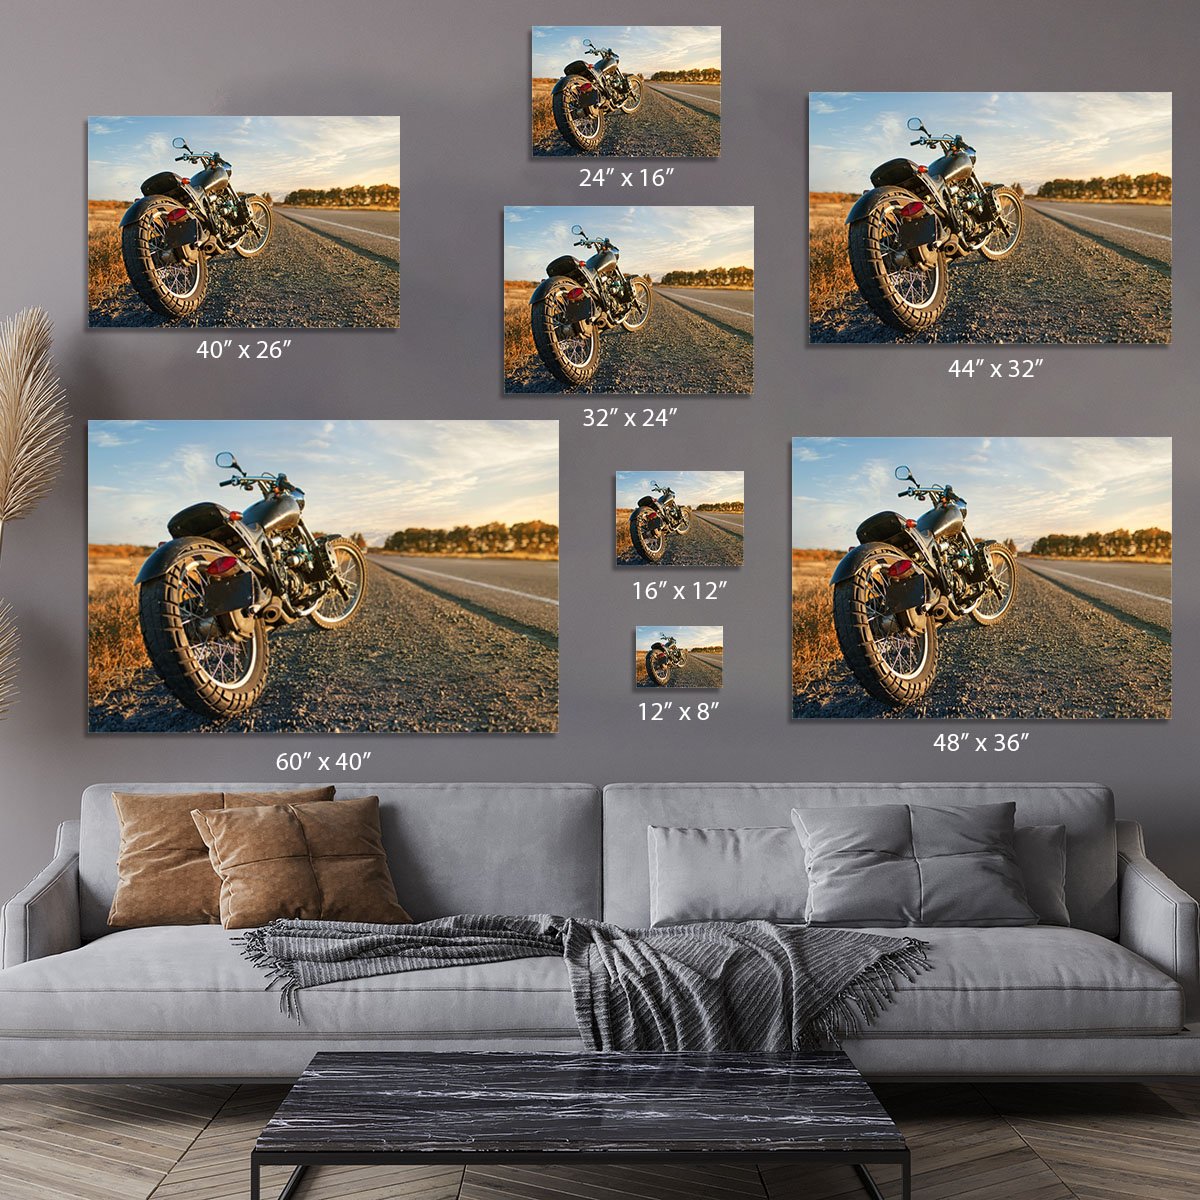 Motorbike under the clear sky Canvas Print or Poster